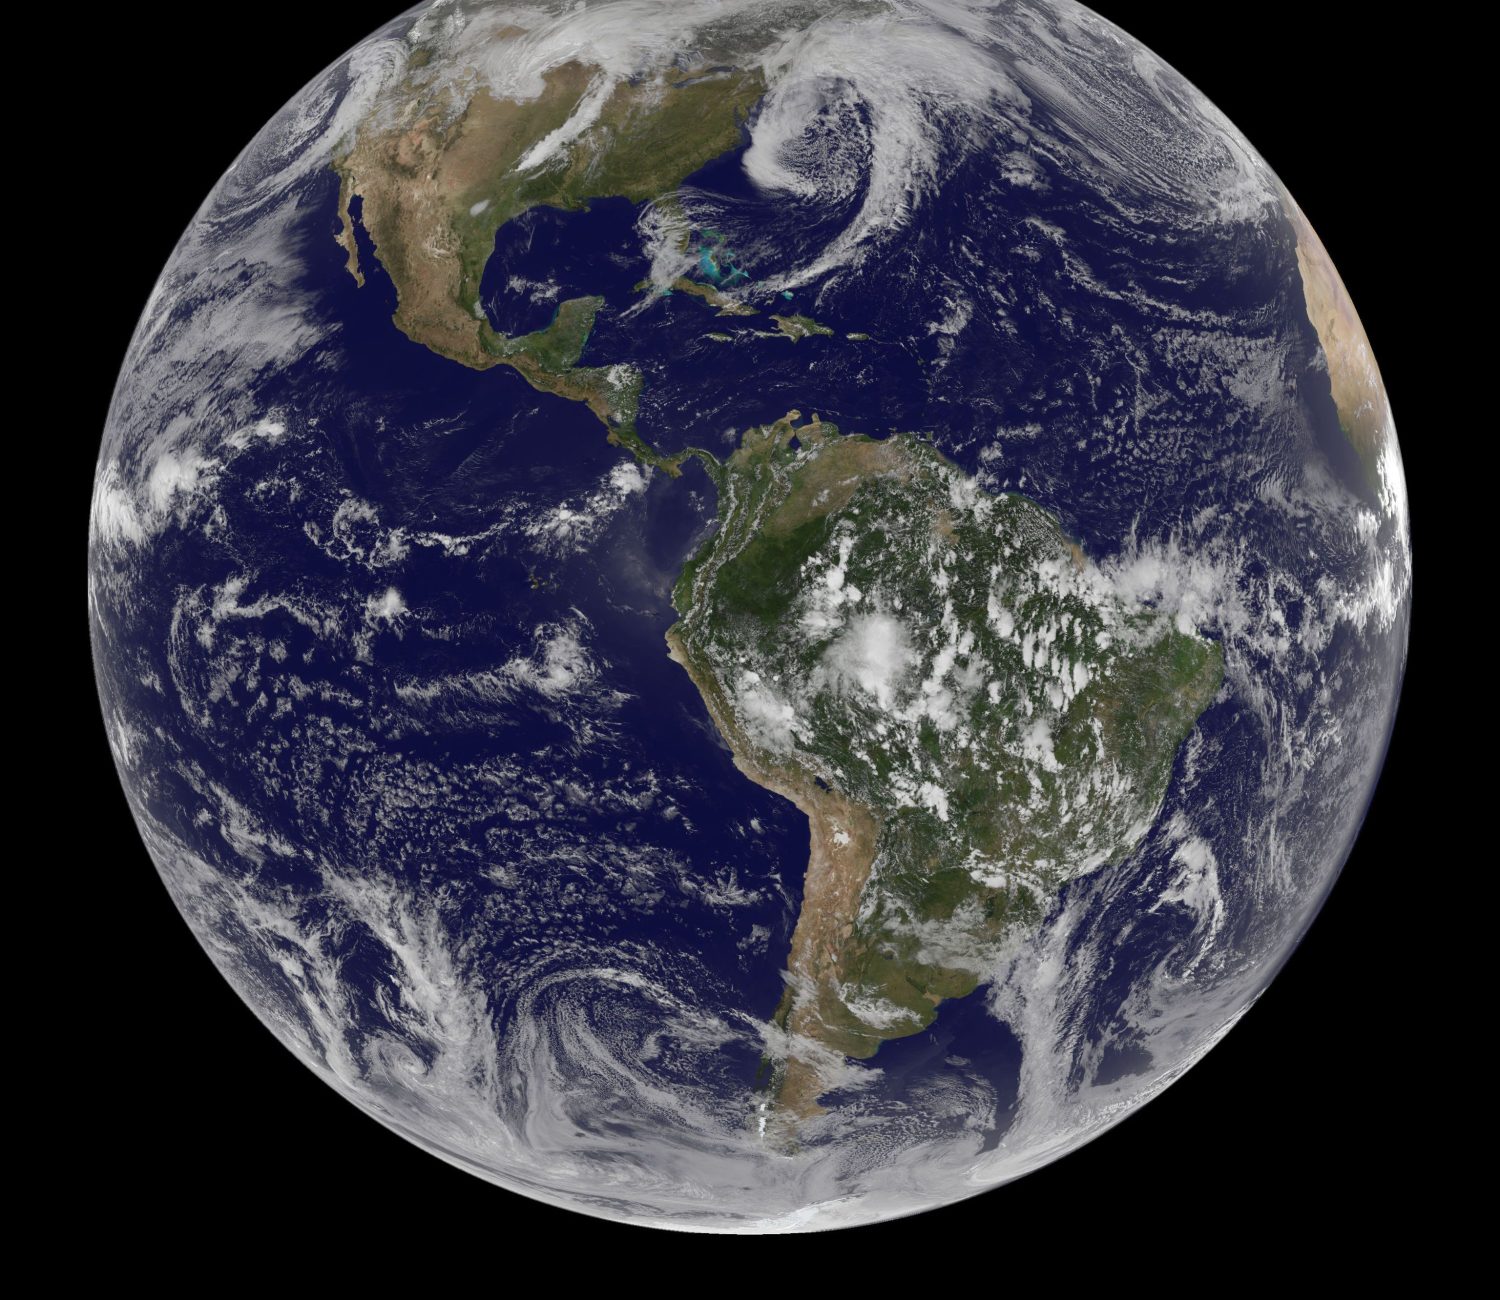 NOAA's GOES-13 and GOES-15 satellite image from March 31, 2014 and released on April 1, 2014 shows the low pressure systems in the eastern Pacific Ocean, over the United States' Heartland, and in the eastern Atlantic Ocean. All three lows have the signature comma shape that make them appear to be curled up dragons.